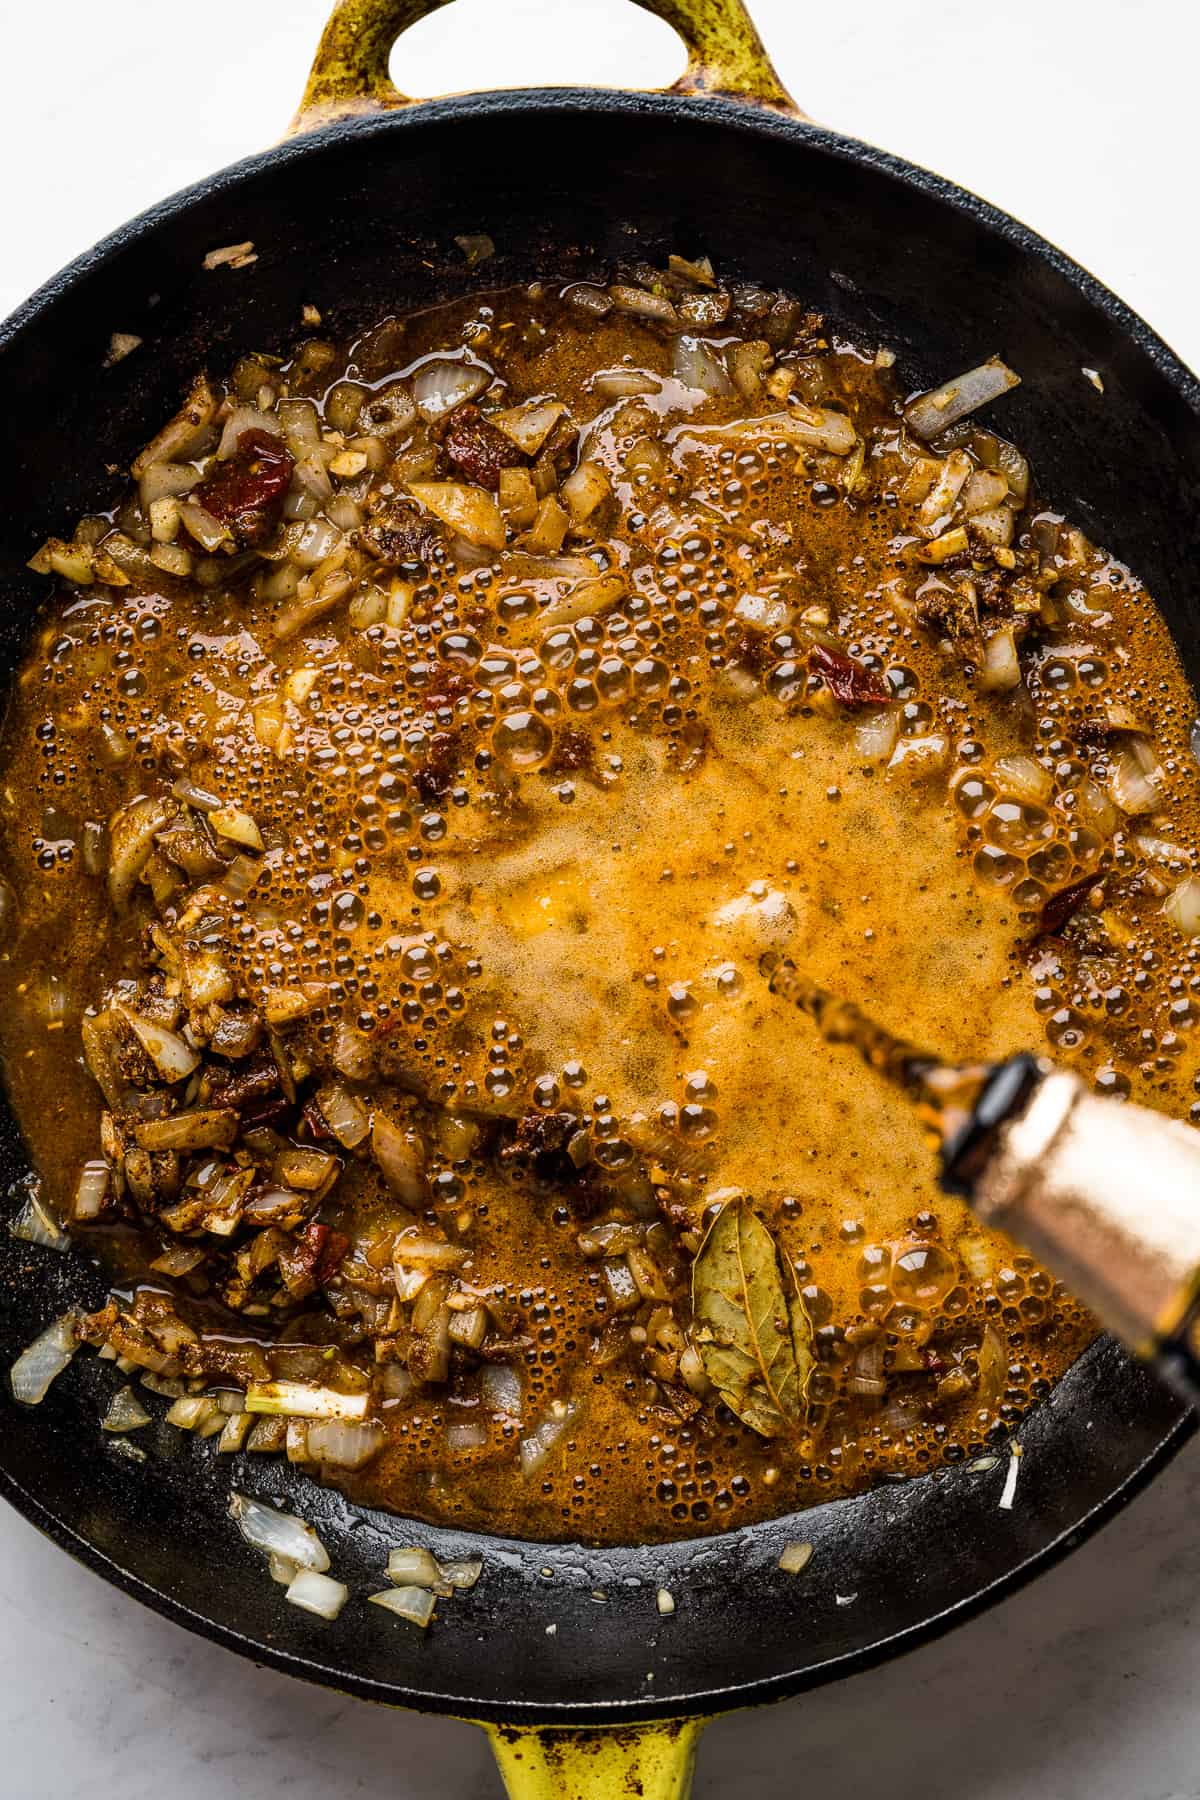 Beer being added to the skillet with cooked onions, garlic, apple cider vinegar, lime juice, spices, and chipotle peppers.